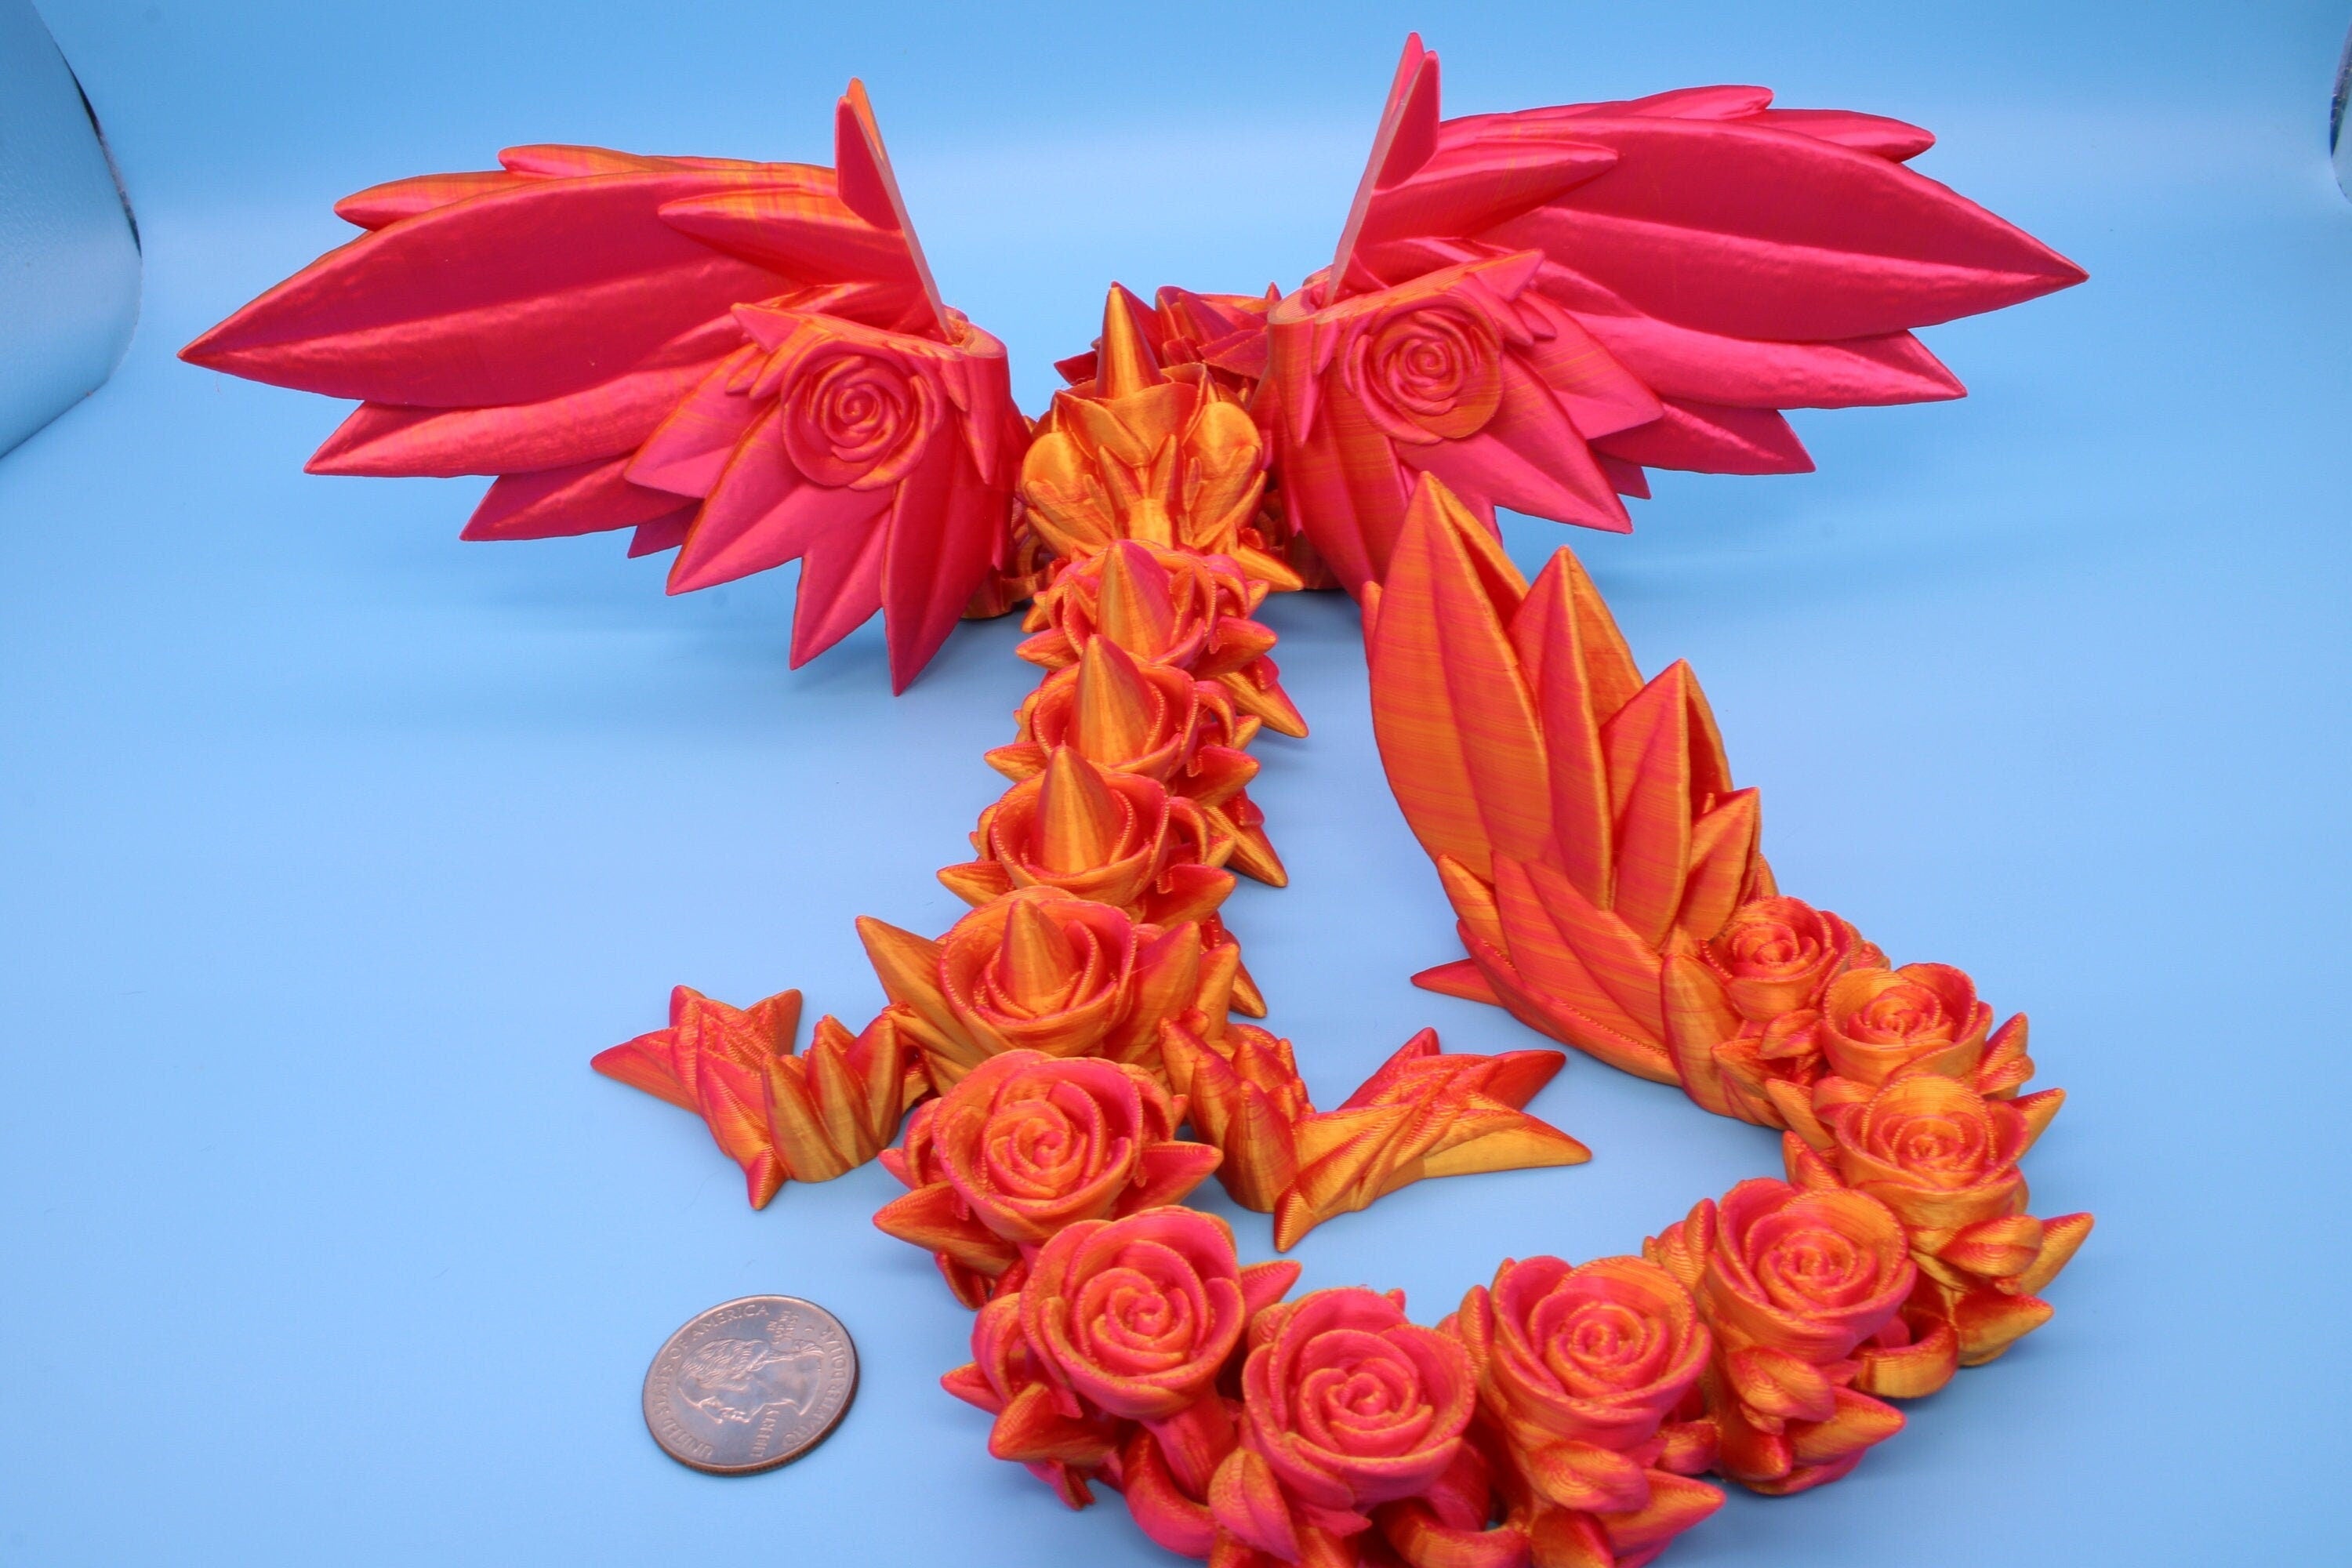 Pink & Gold Rose Wing Articulating Dragon | 3D Printed Fidget | Flexi Toy | Adult Fidget Toy | Sensory Desk Toy | 19 in. | Valentines Day